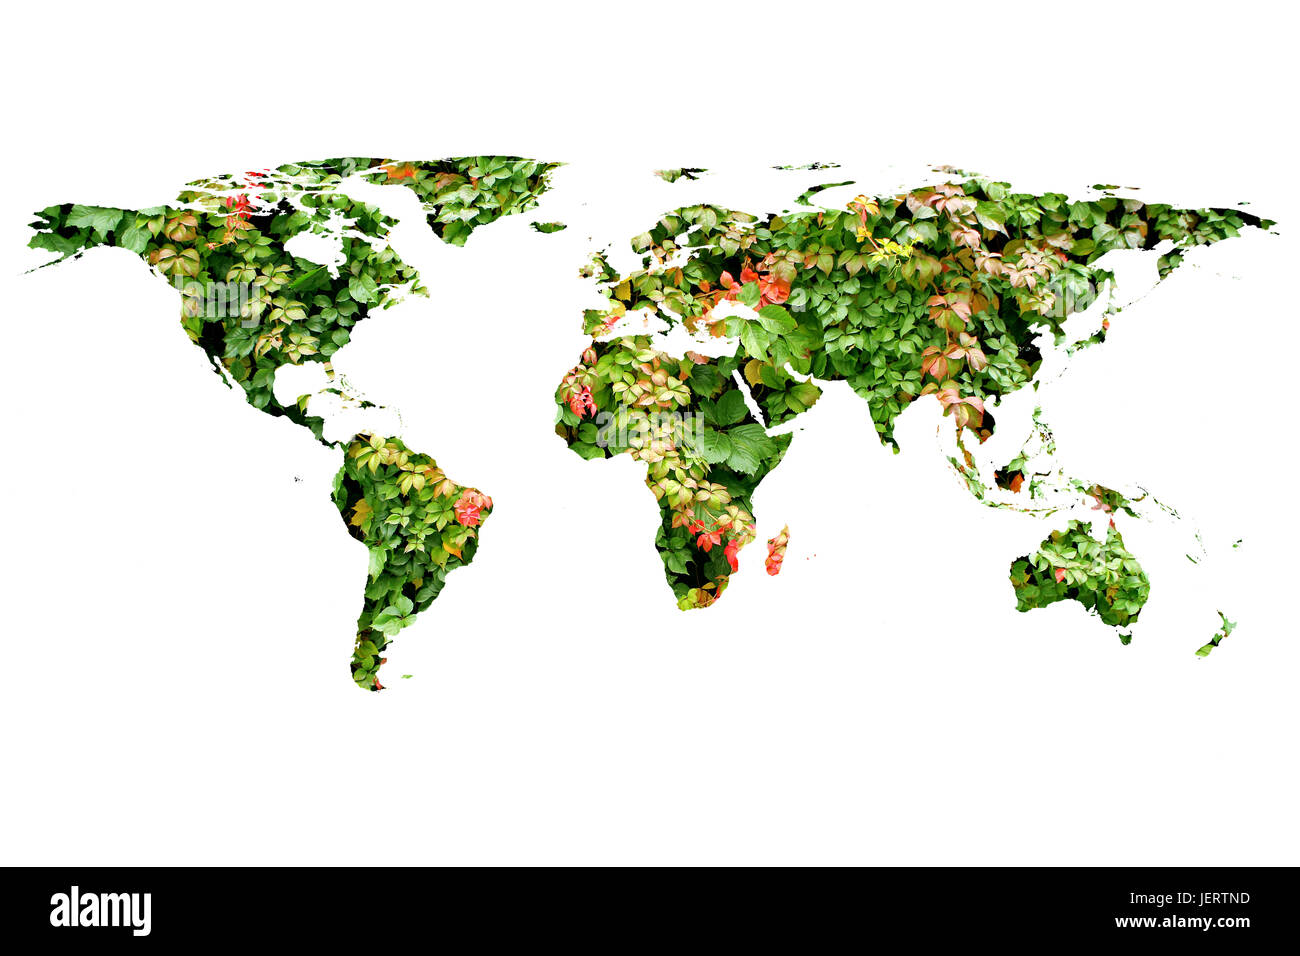 conceptual image of flat world map and leaves. NASA flat world map image used to furnish this image. Stock Photo